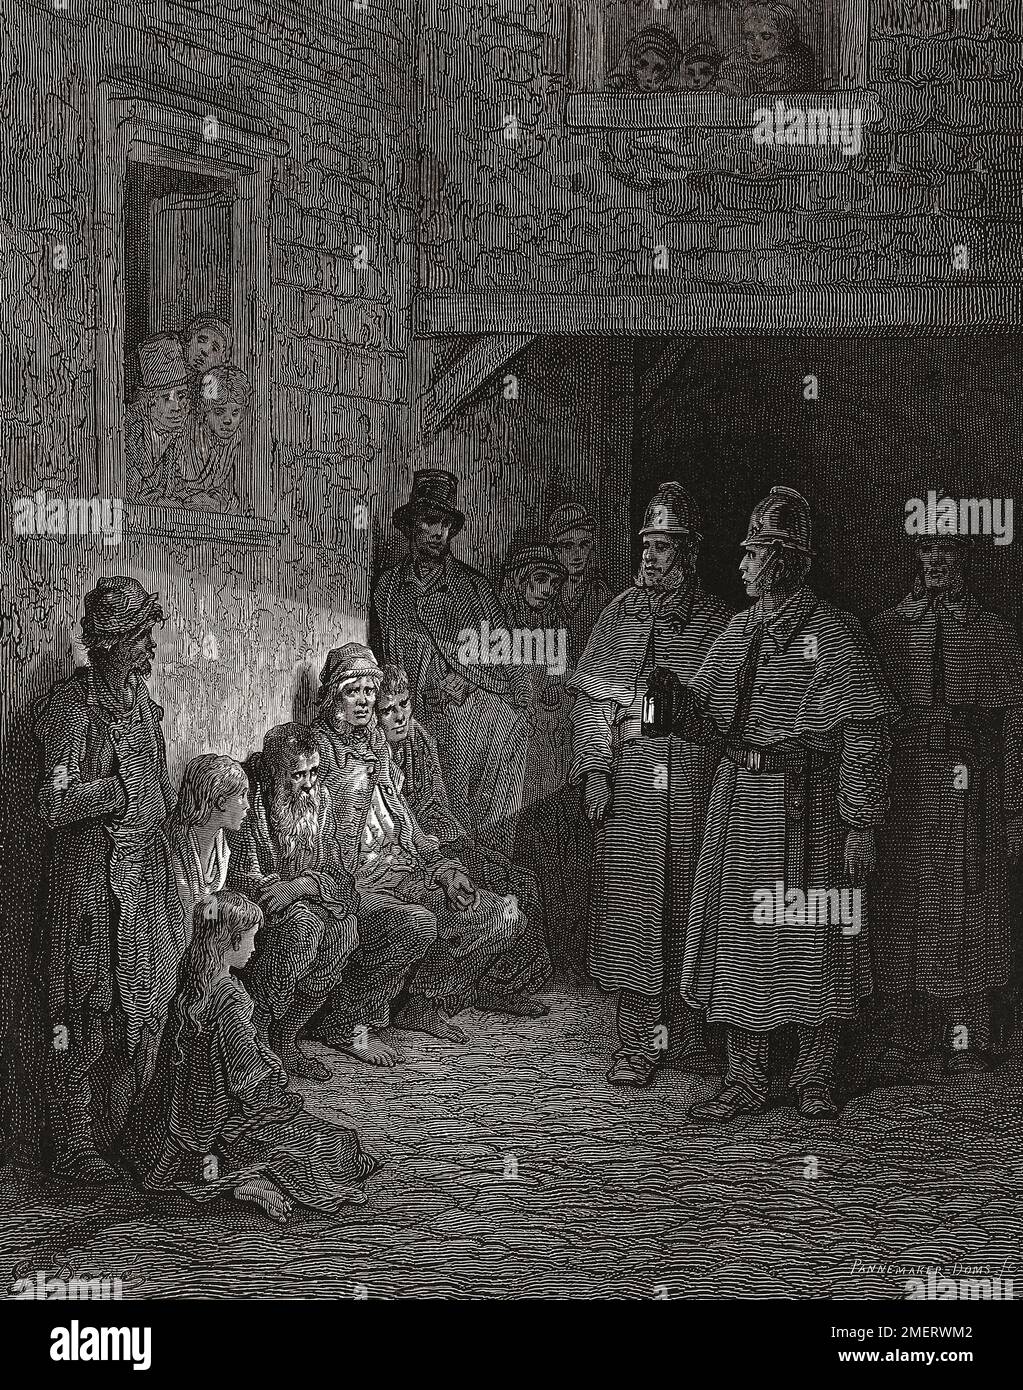 A police patrol in 19th century London shine a bullseye lantern onto a group of homeless and destitute people.  After an illustration by Gustave Doré in the 1890 American edition of London: A Pilgrimage written by Blanchard Jerrold and illustrated by Gustave Doré. Stock Photo